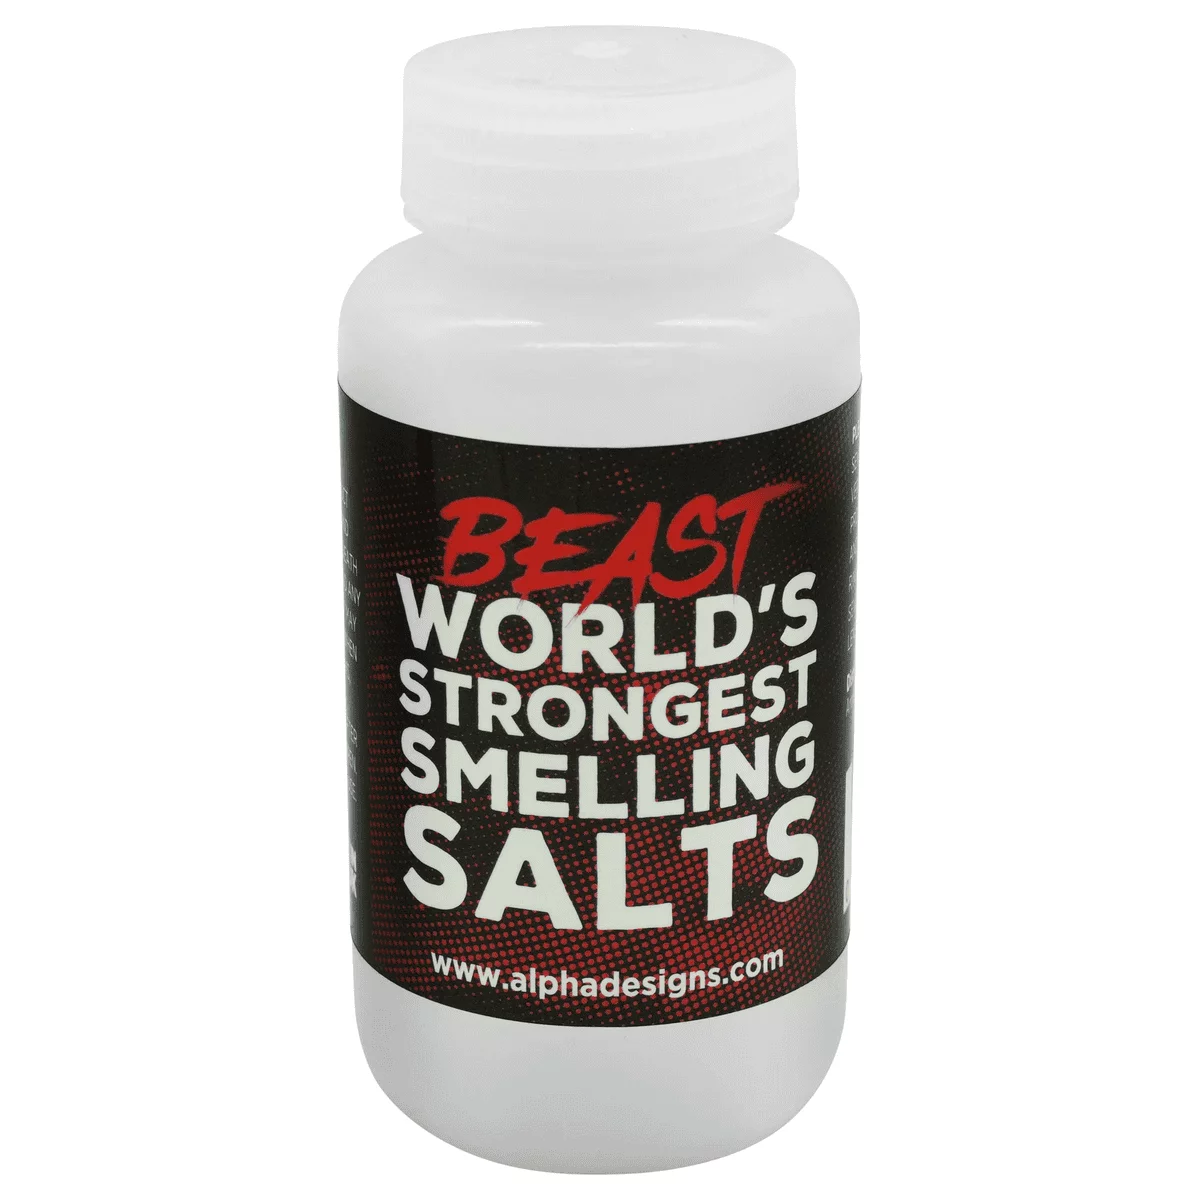 Worlds Strongest Smelling Salts